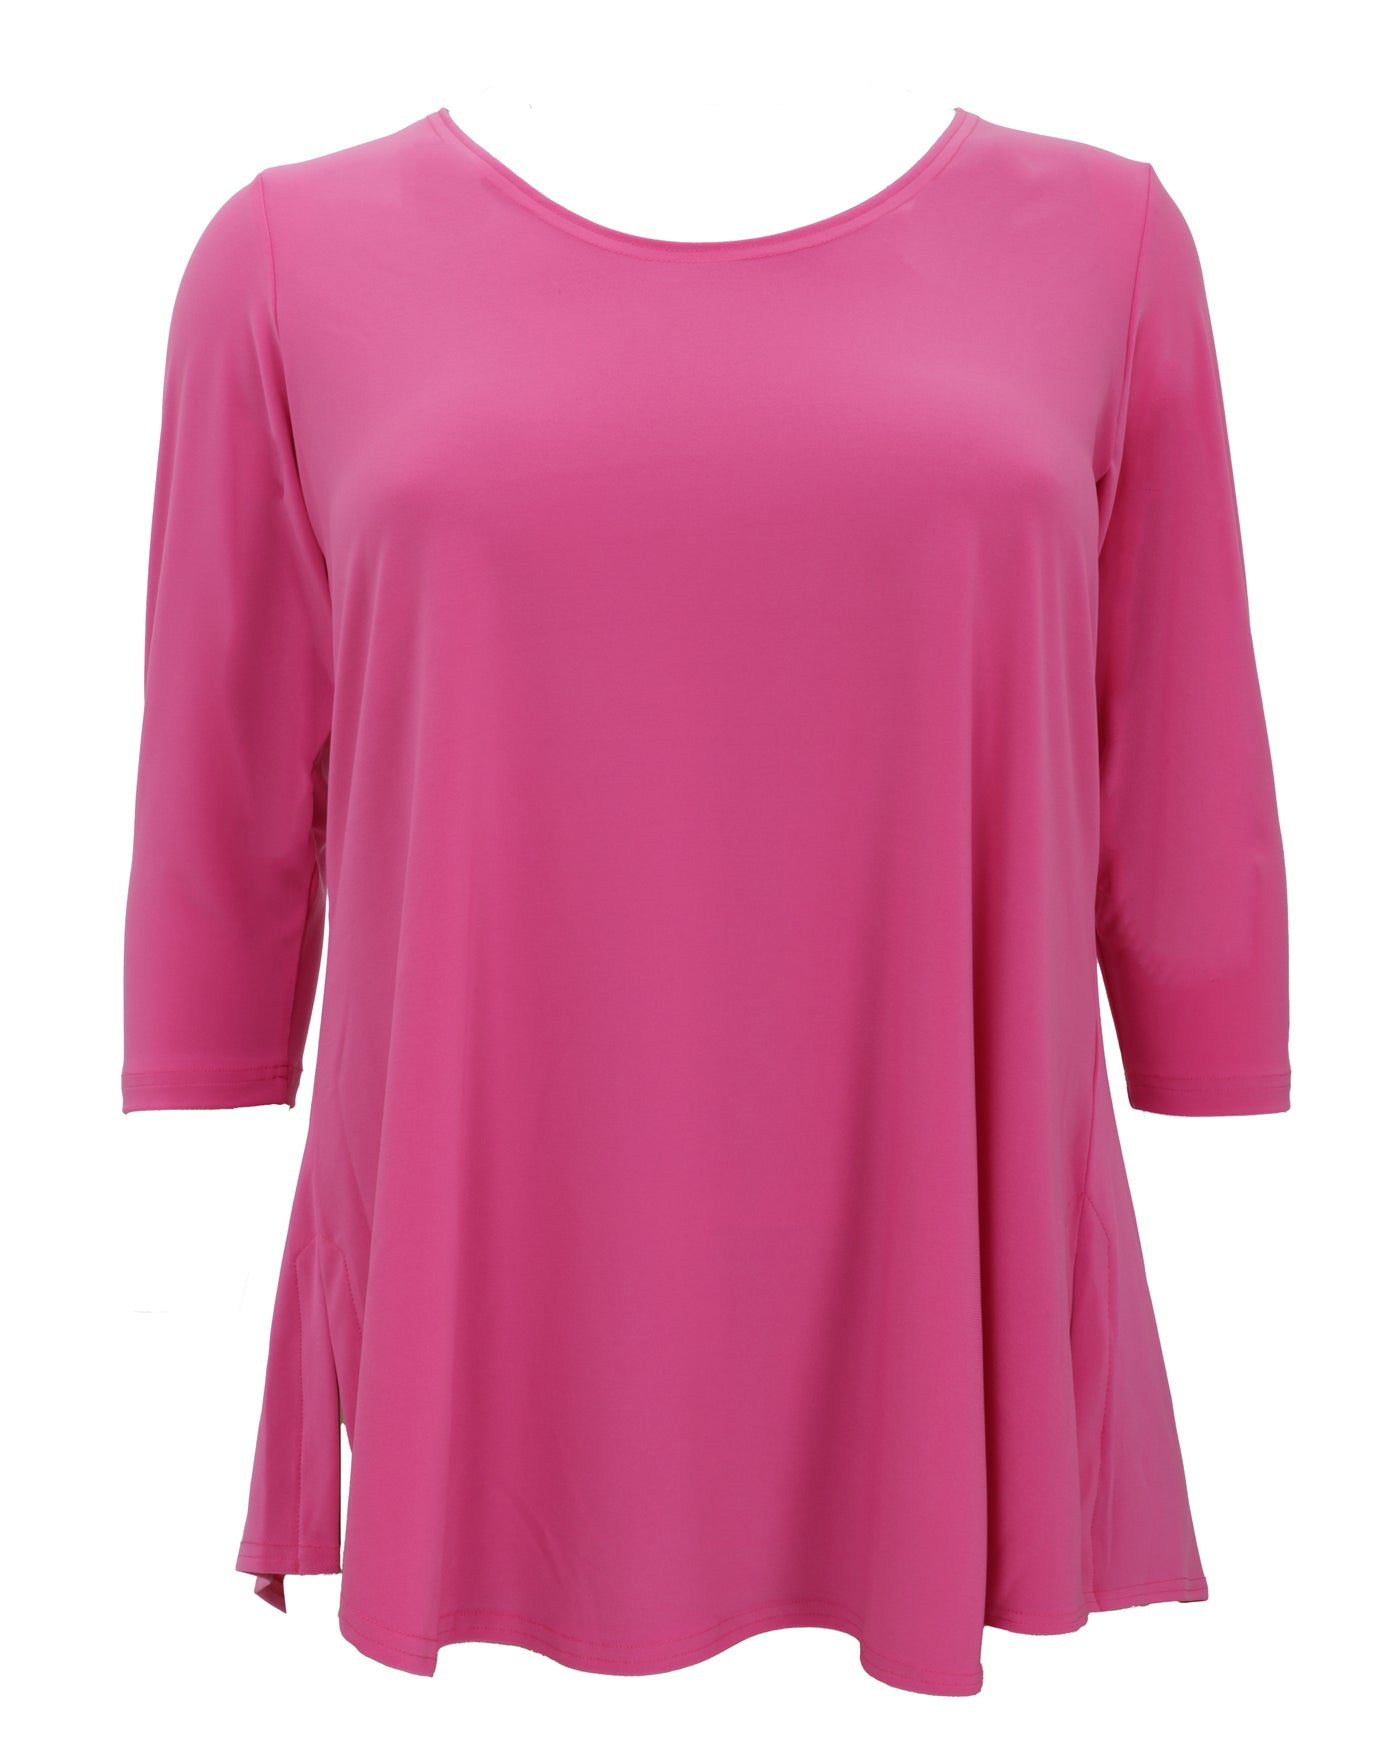 Sympli Go To Classic Relax Tee in Peony